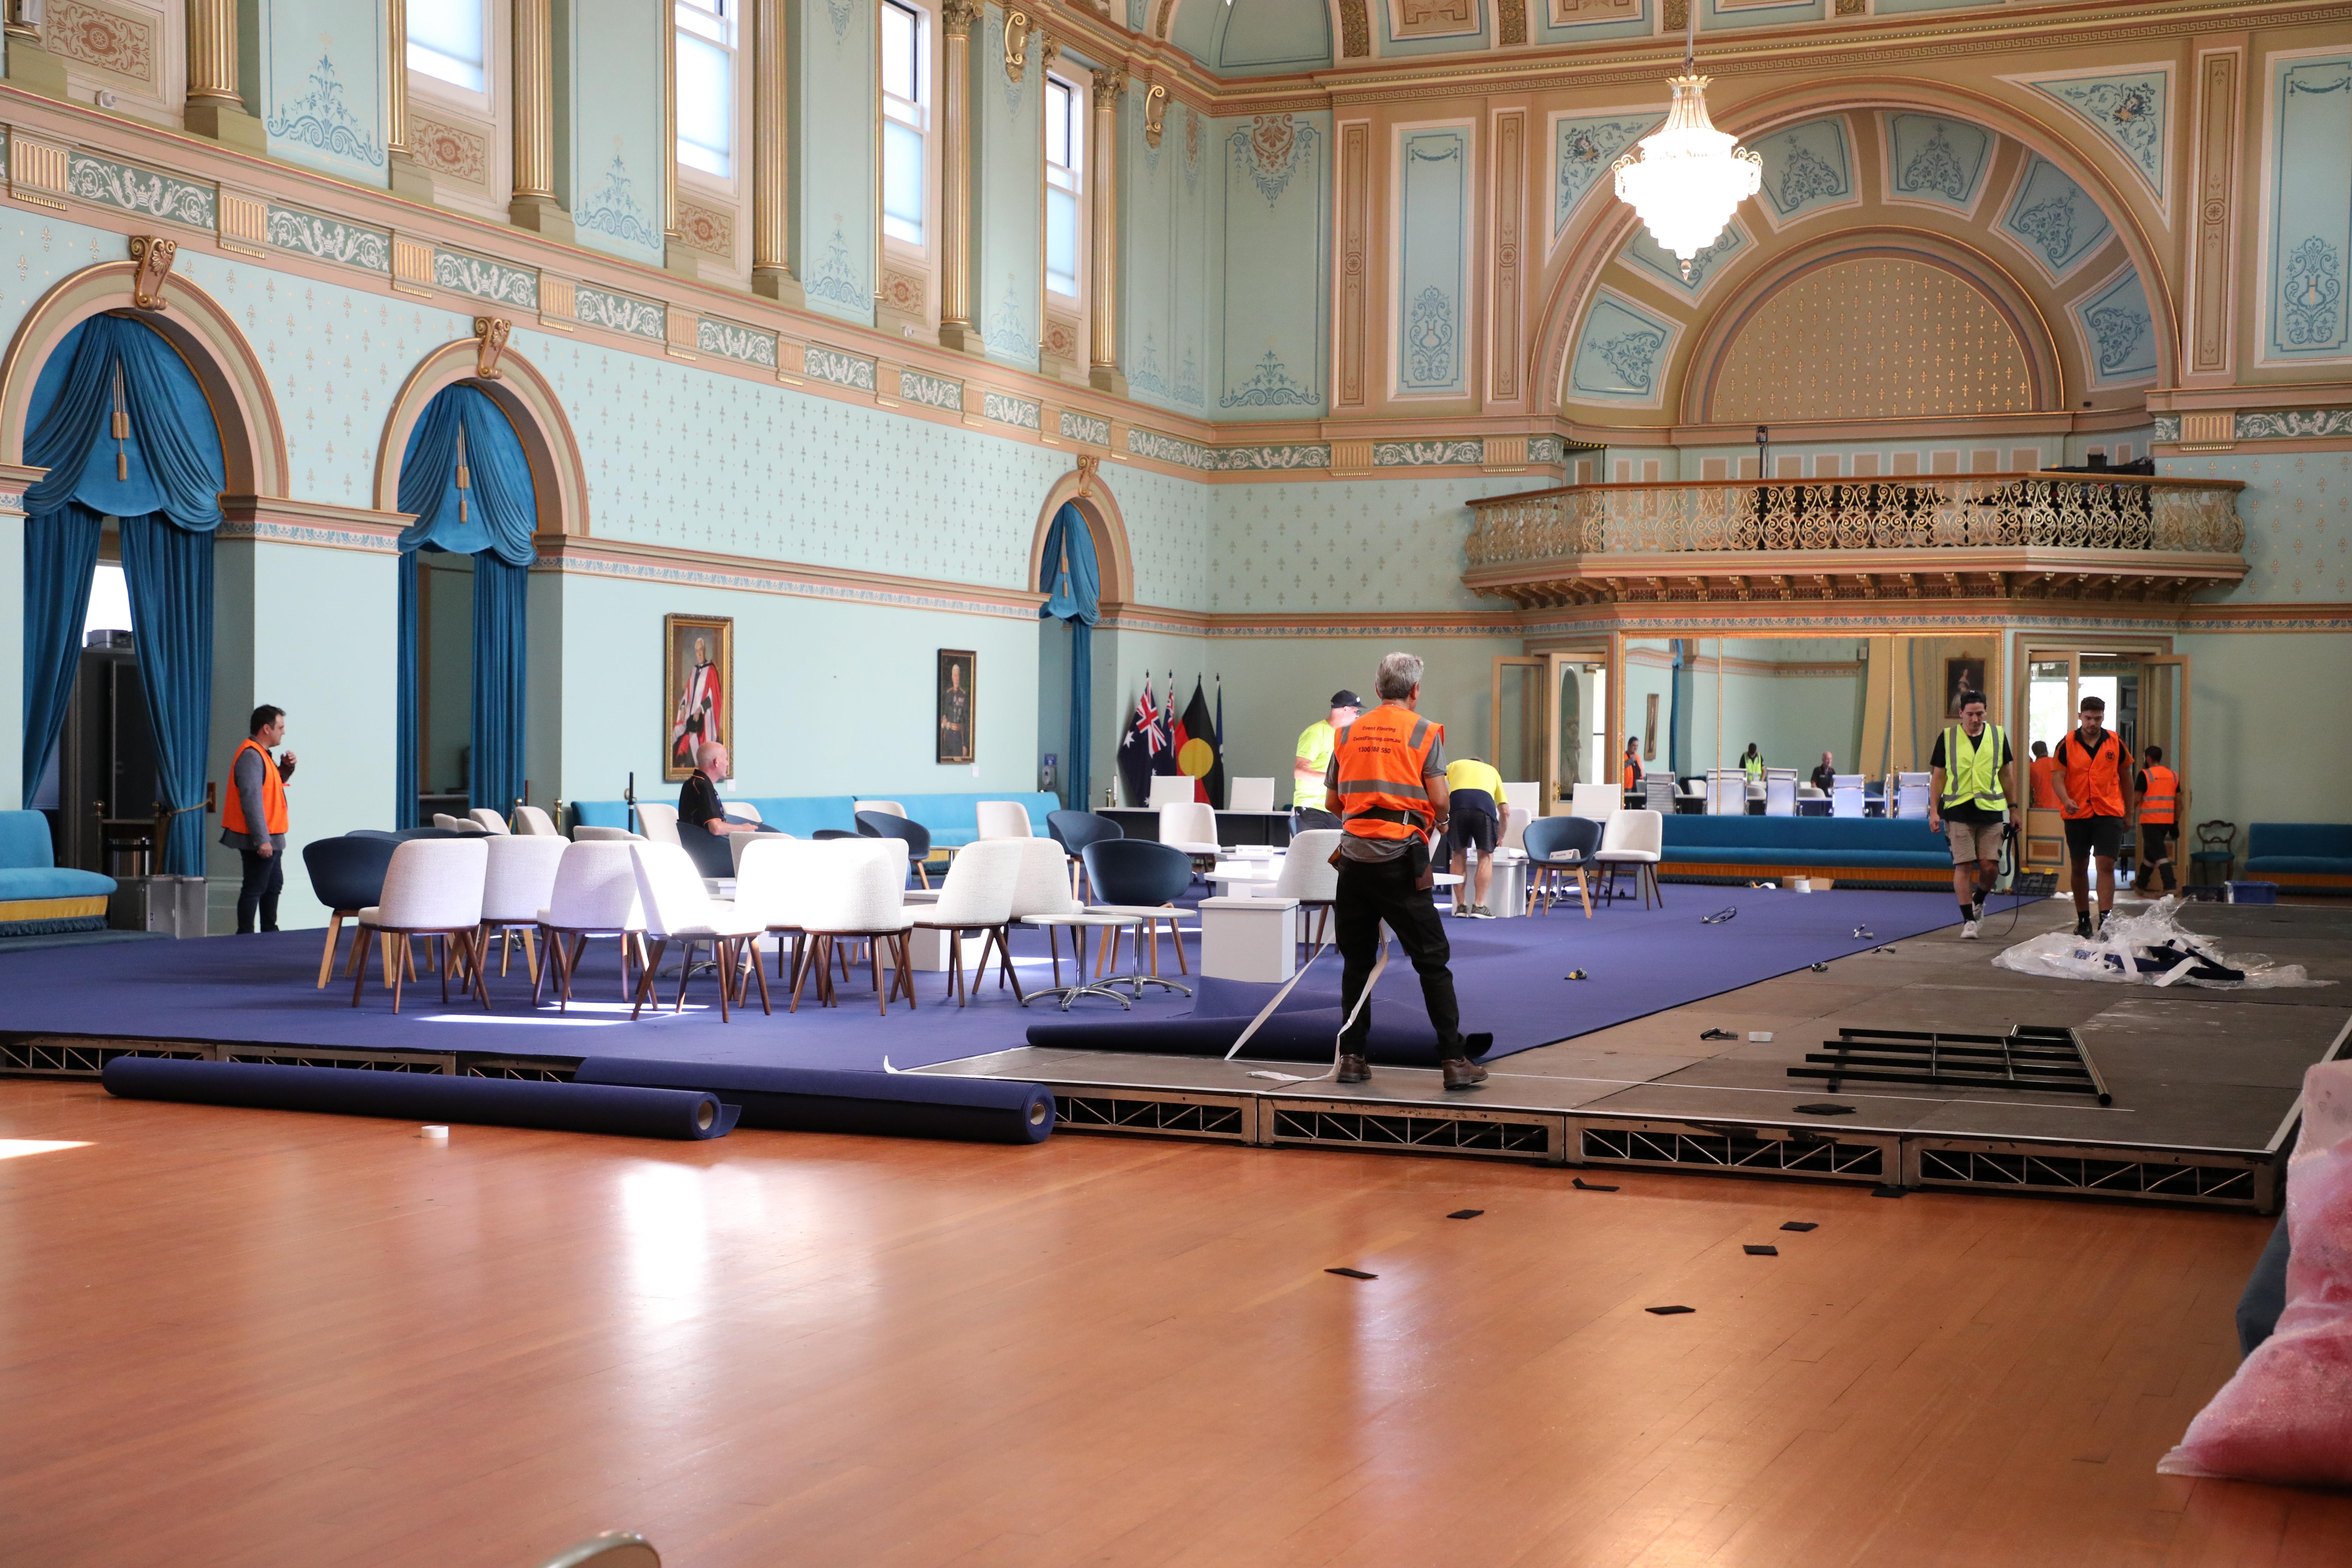 Preparations for the ASEAN Leaders’ Retreat taking place in the Ballroom at Government House.  